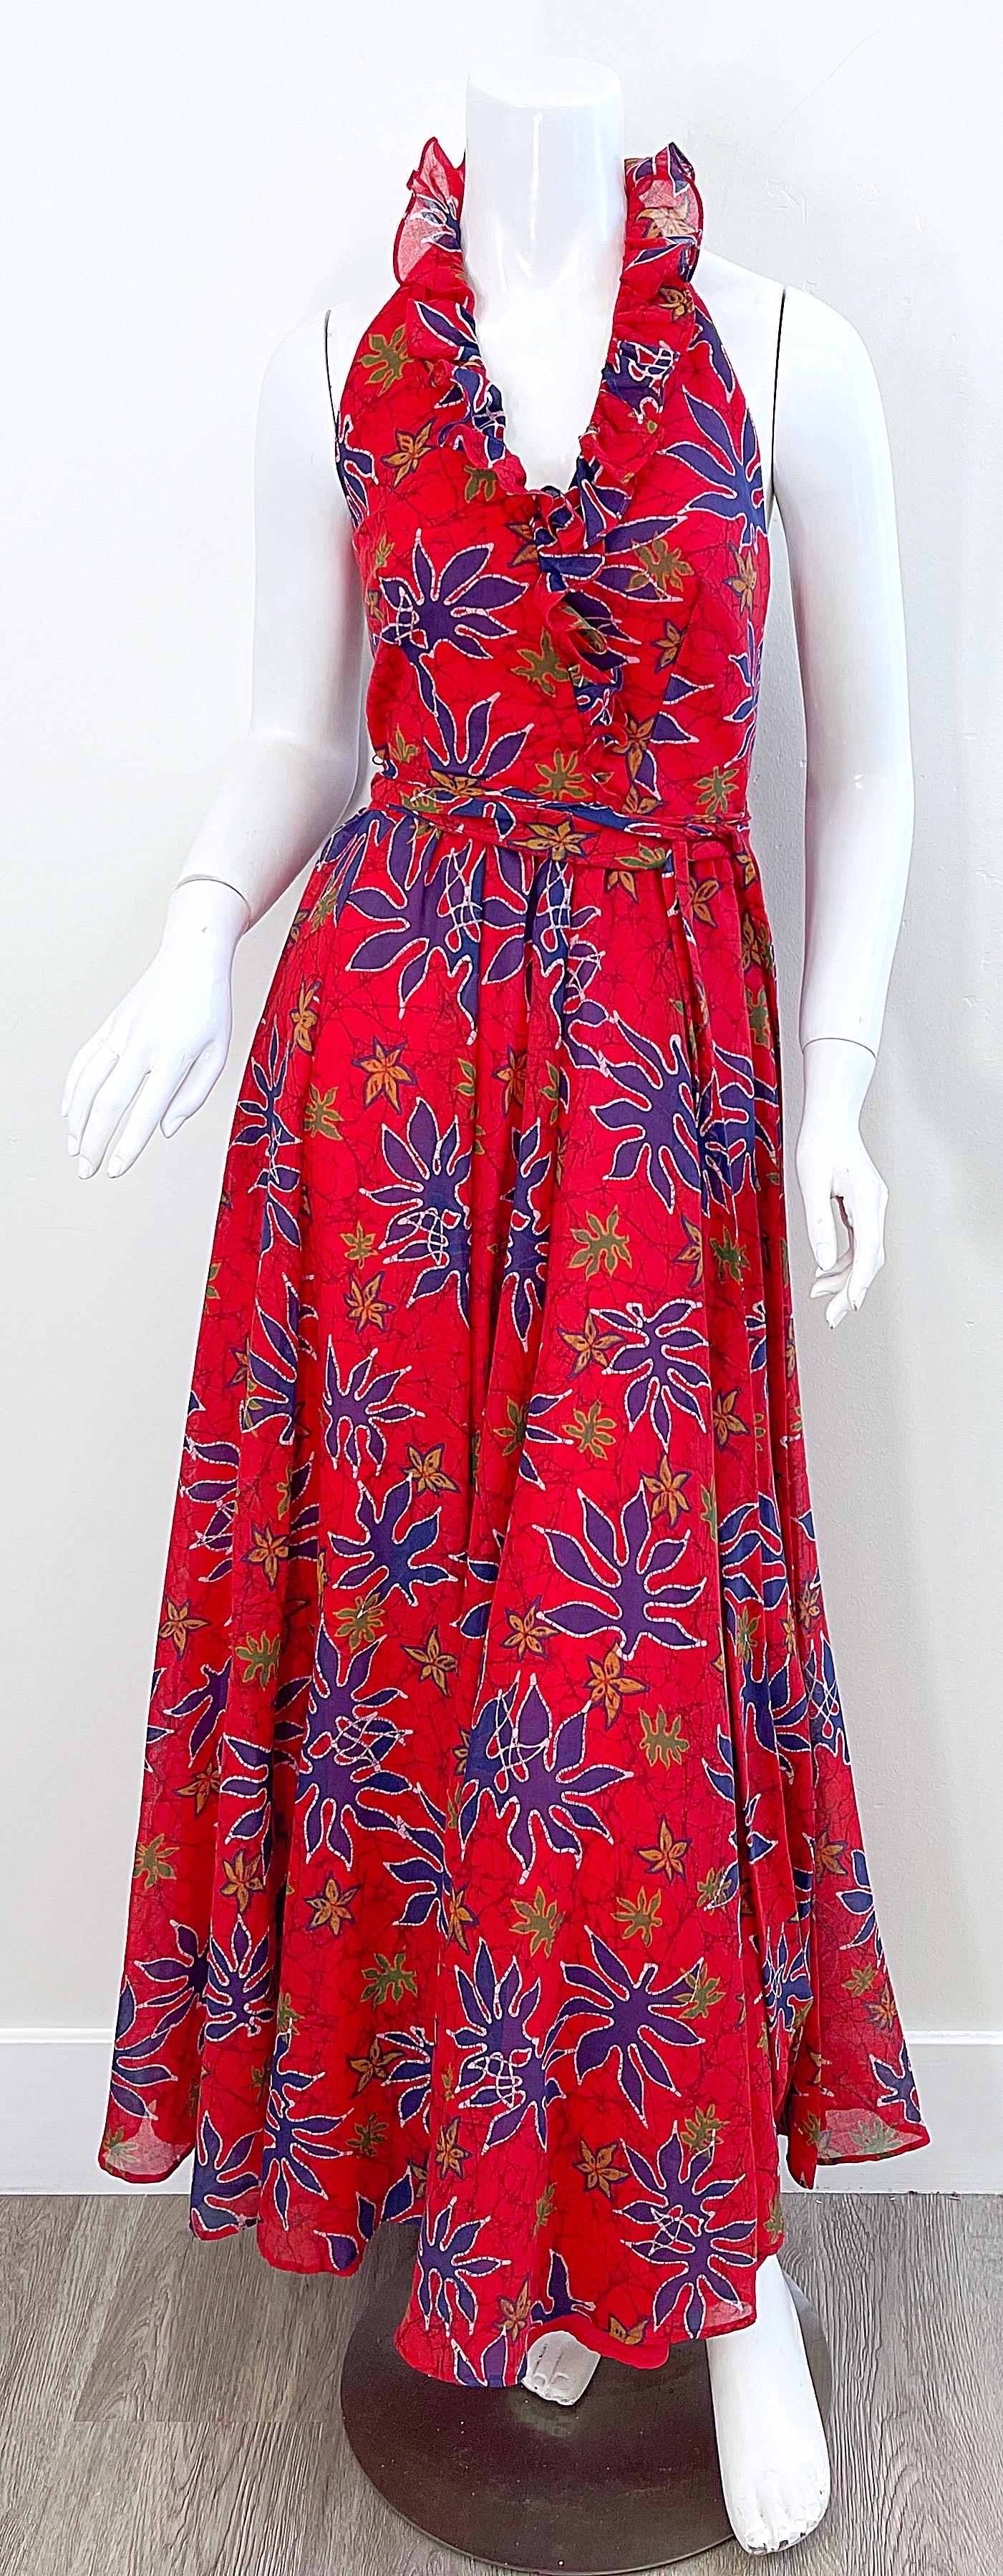 Beautiful 1970s LILLI DIAMOND cotton voile halter maxi dress gown ! The main color of this beauty is red. Abstract leaf prints throughout in vibrant hues of blue, orange and green. Detachable sash belt at waist, and ruffles around the neck. Hidden